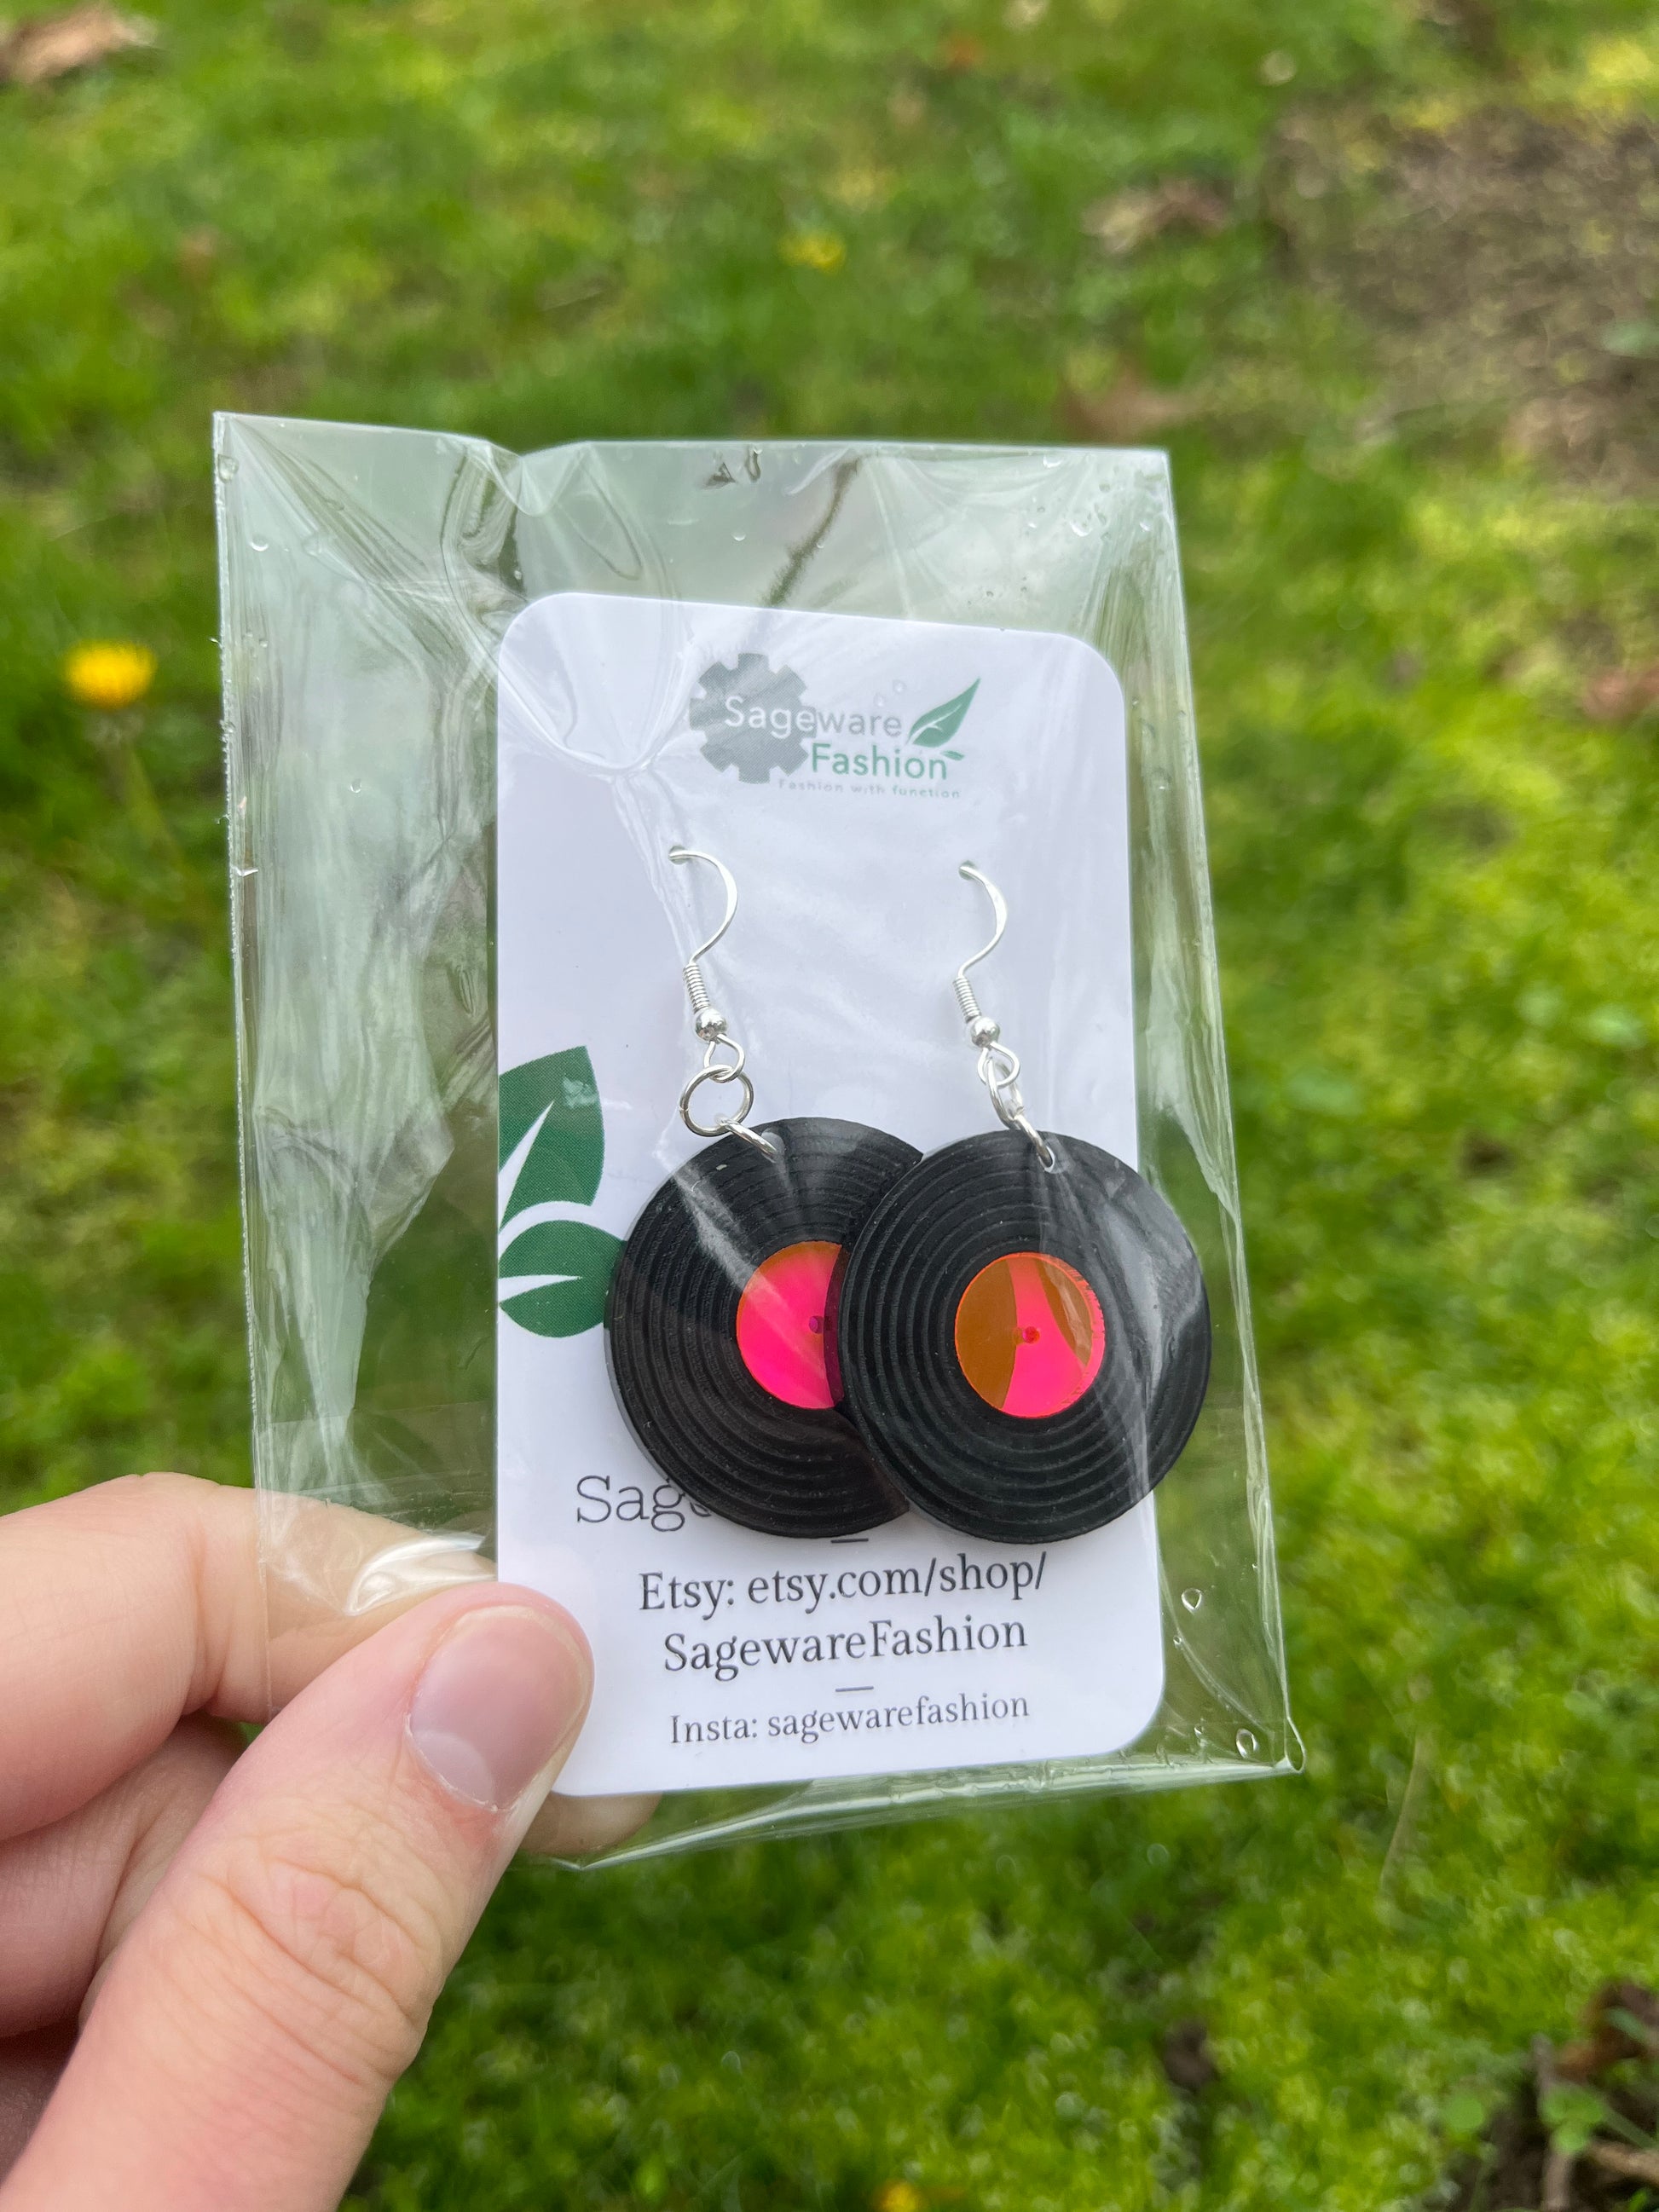 record earrings in packaging being held over grass background